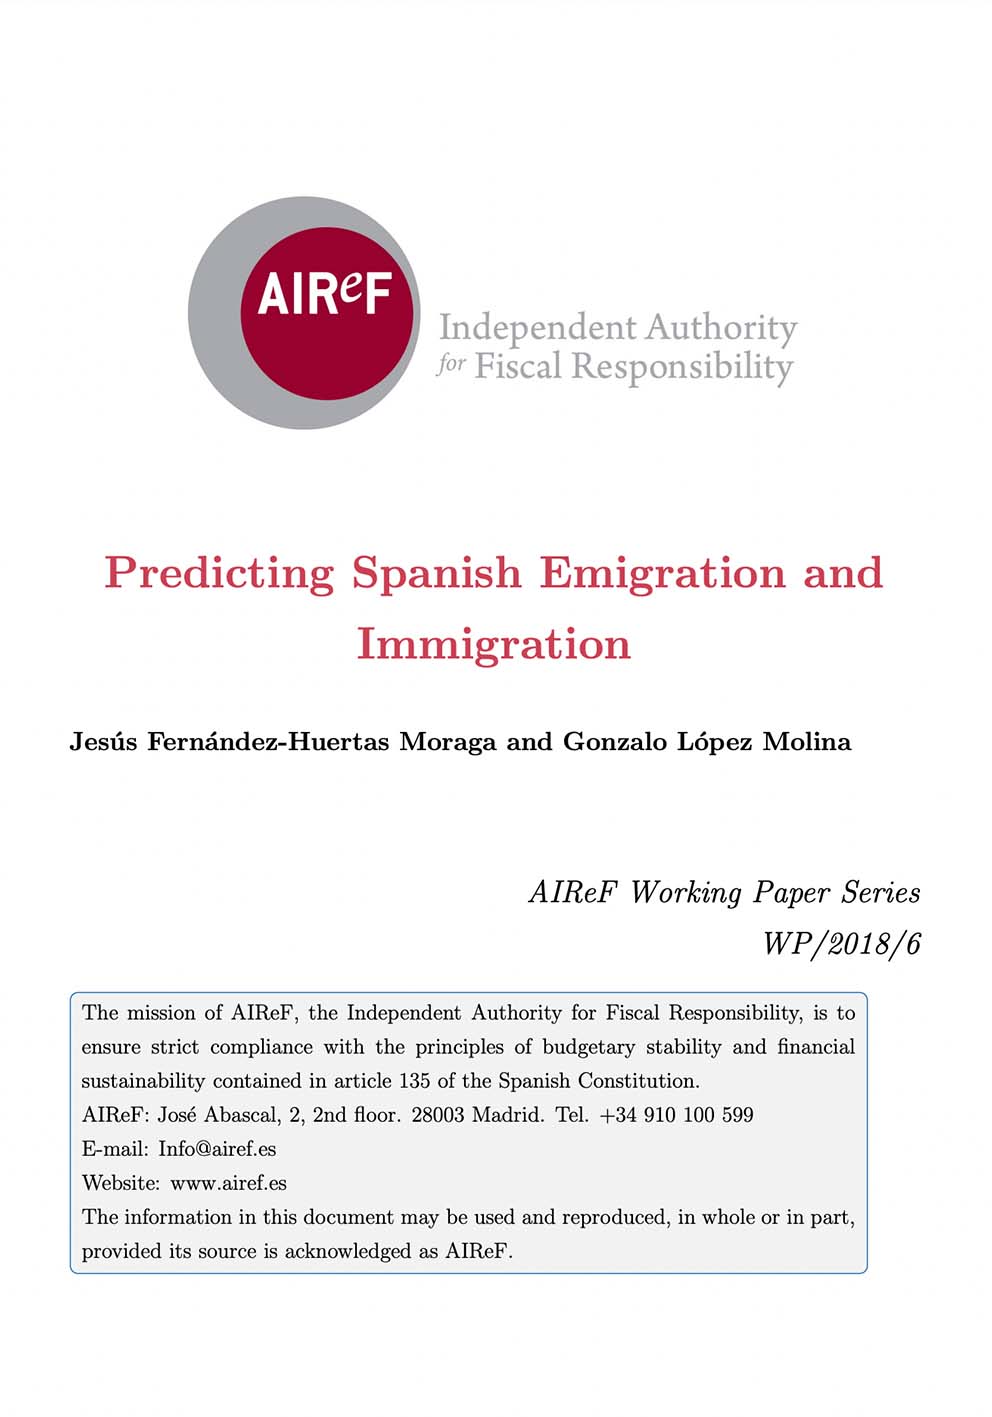 Predicting Spanish emigration and immigration